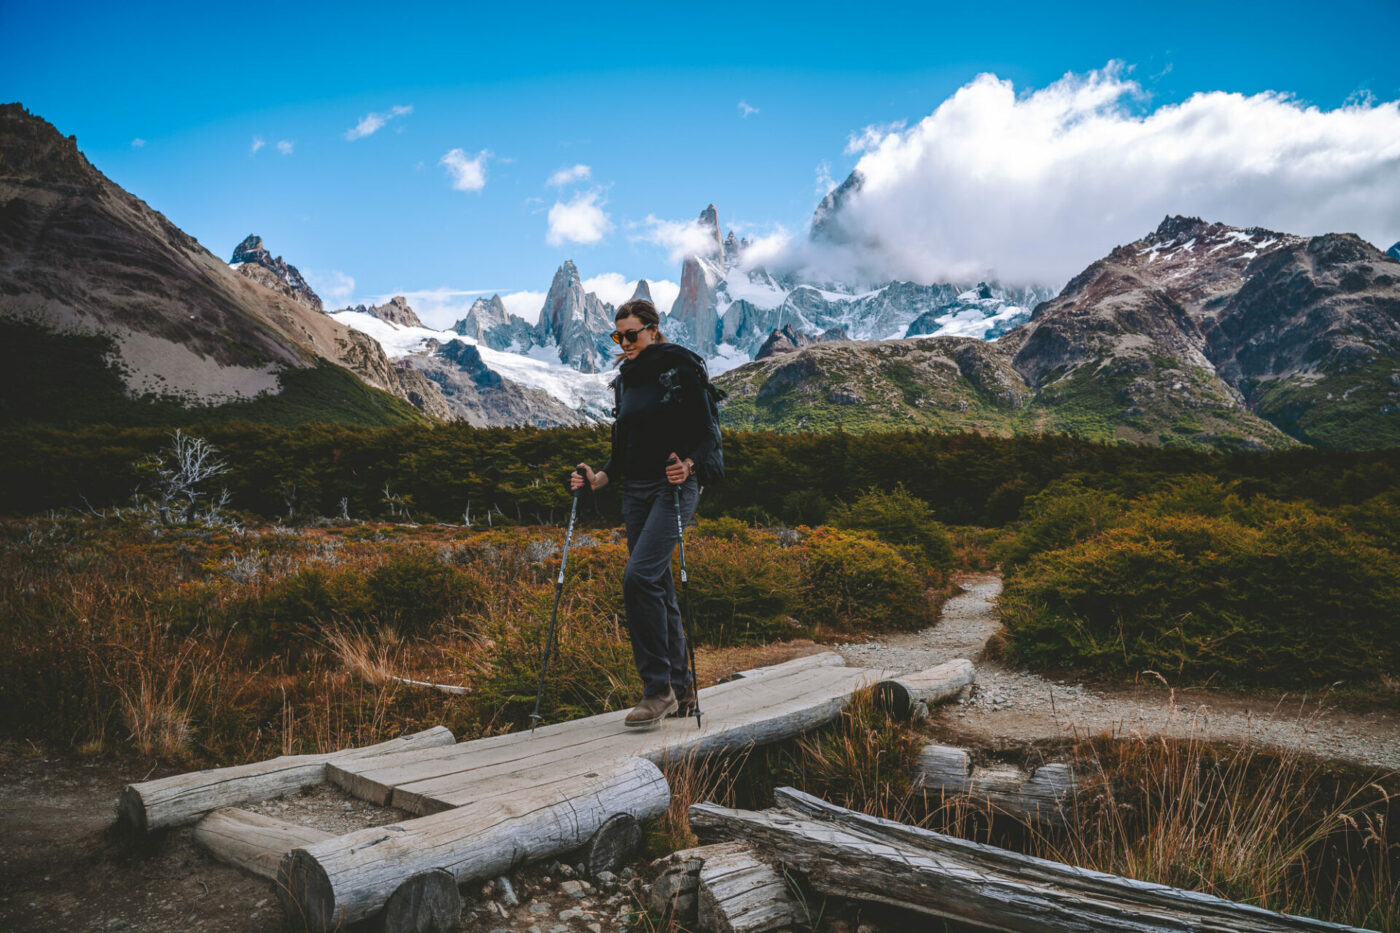 Admiring the view of these glaciers while Hiking Laguna de los Tres